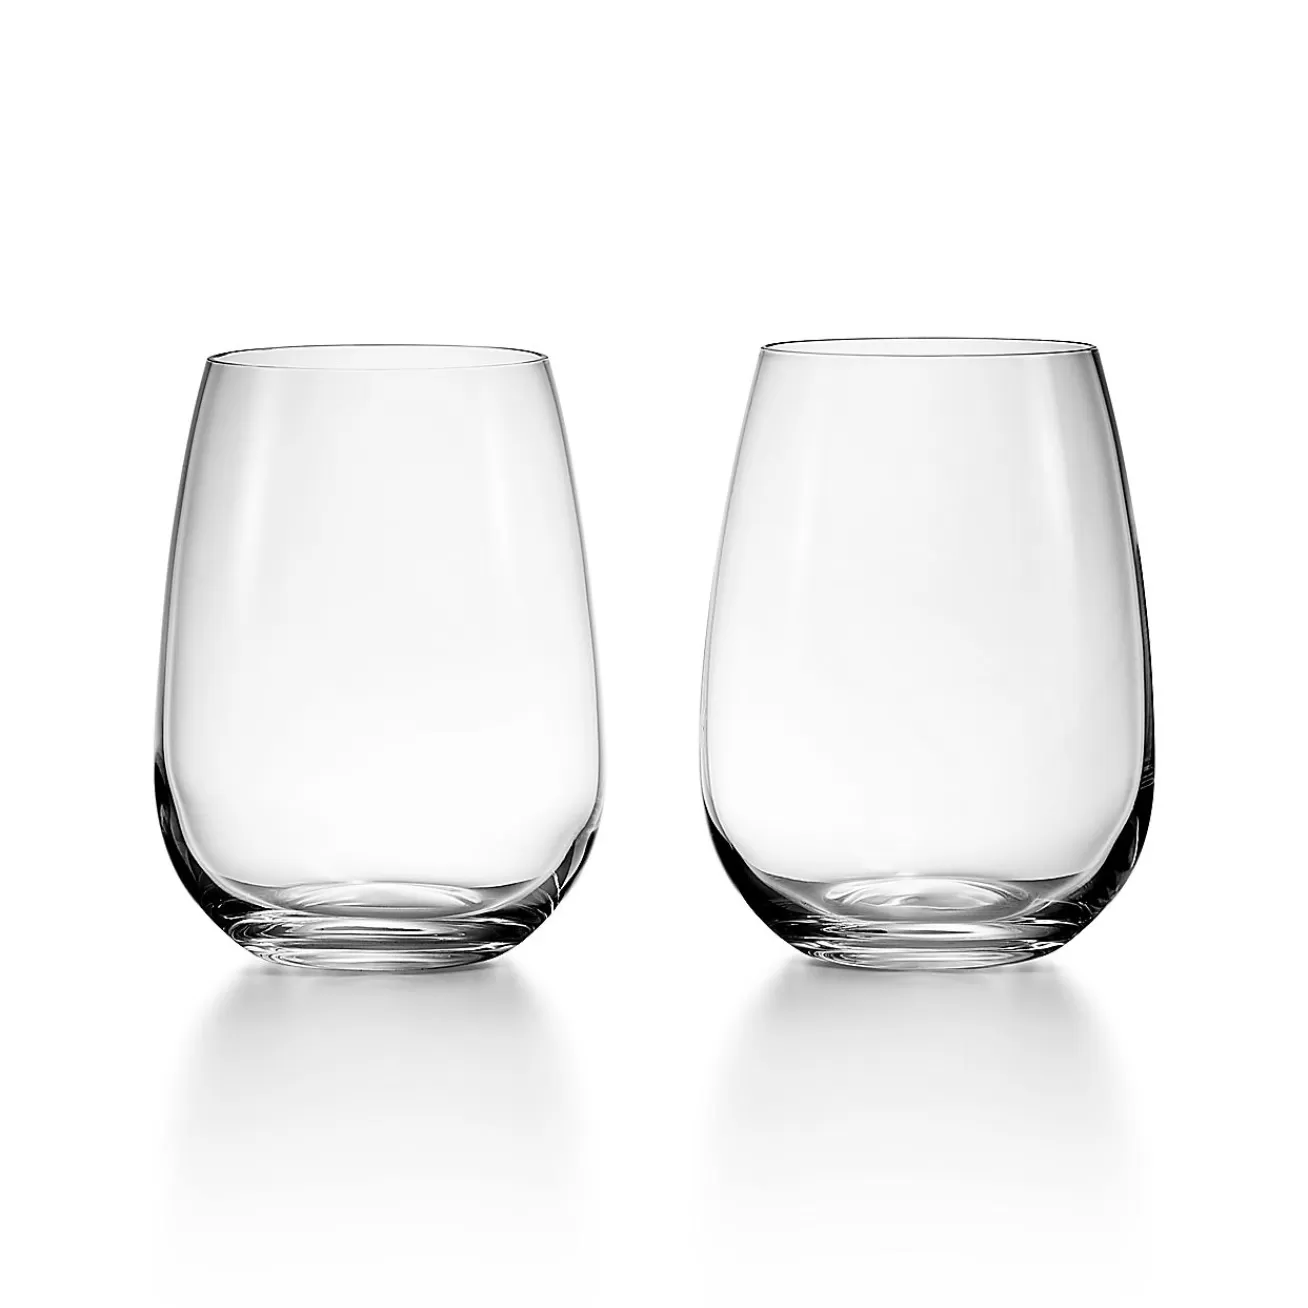 Tiffany & Co. Tiffany Home Essentials Stemless White Wine Glasses in Crystal Glass, Set of Two | ^ The Home | Housewarming Gifts